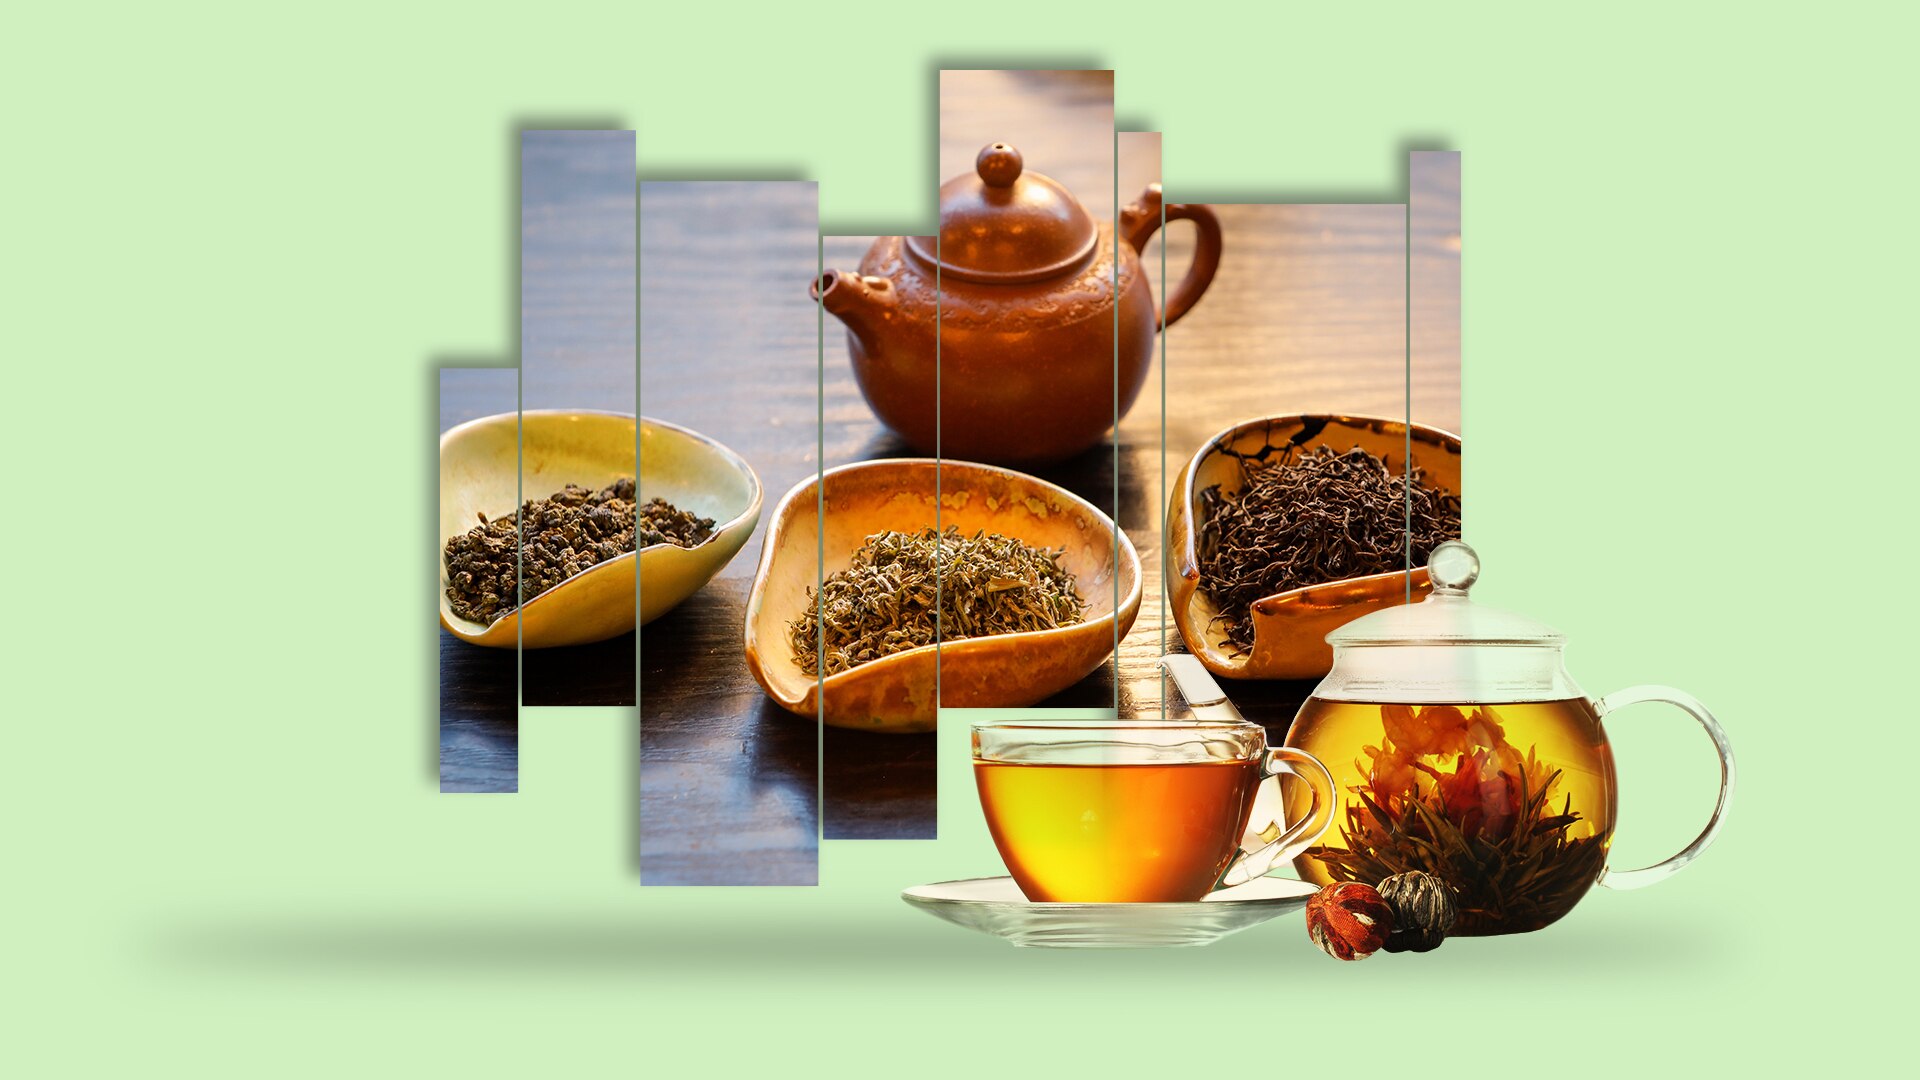 An edited image of a teapot with tea leaves on a green background.